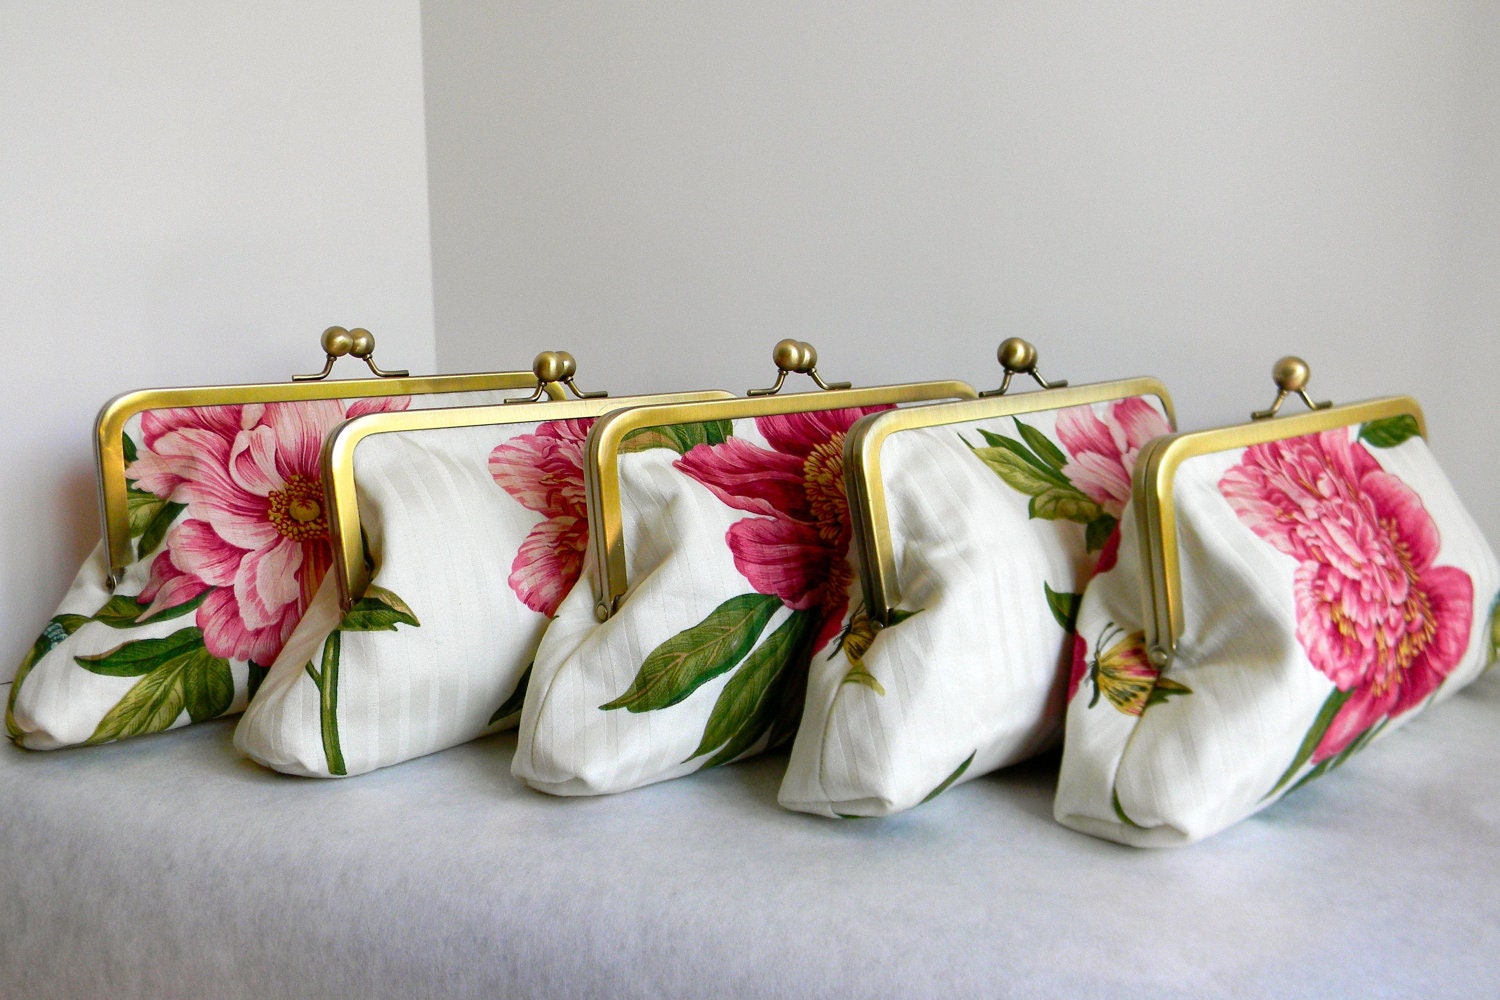 Gorgeous pink peony flower clutch set of 5 pink floral wedding bridal party clutches small purse